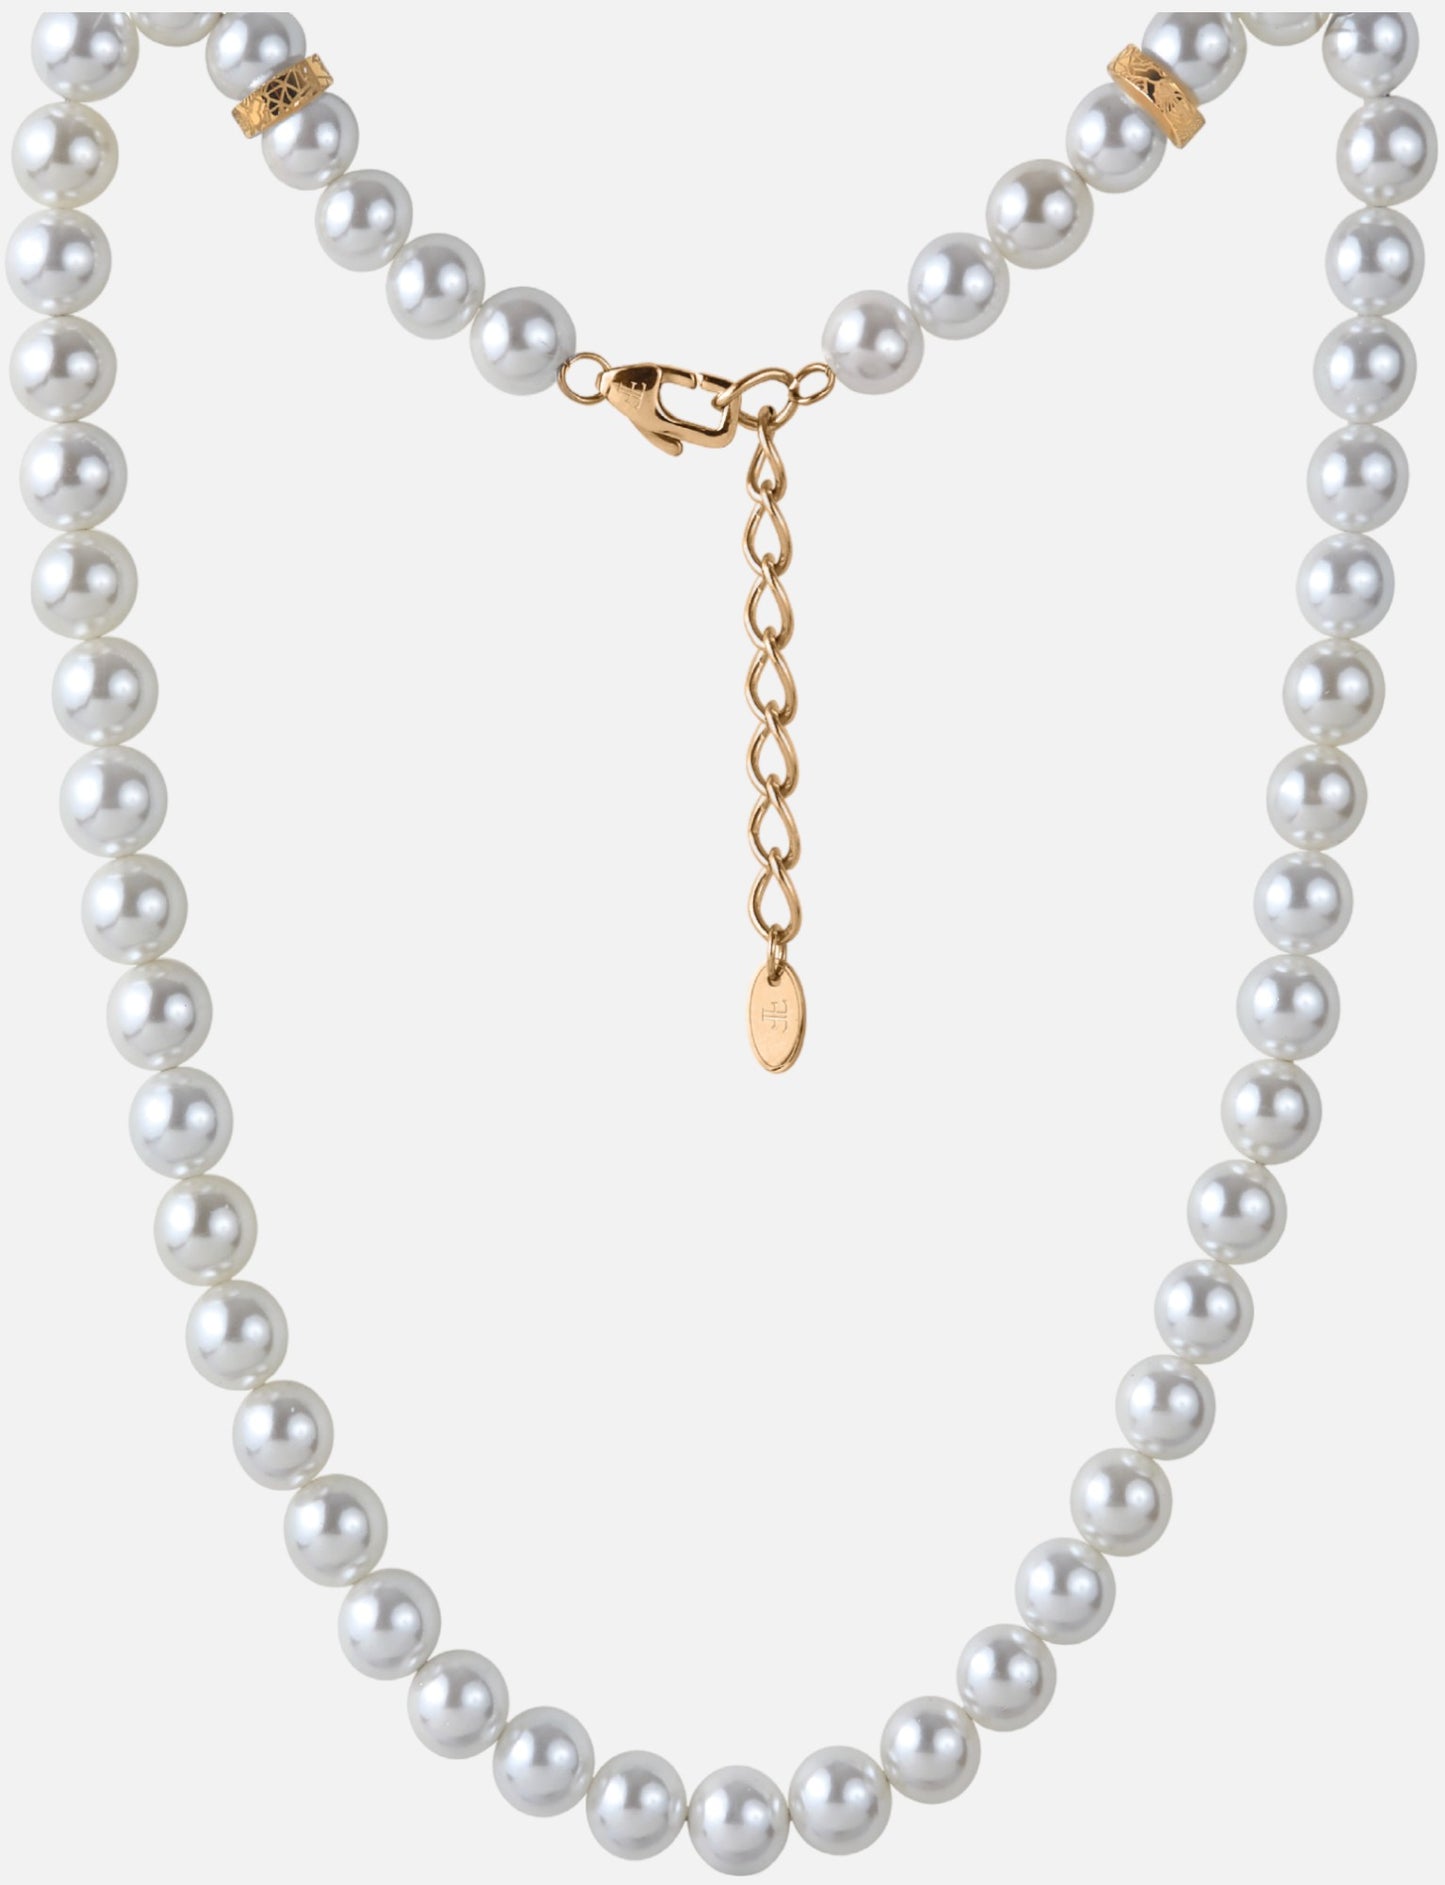 10mm Shell Pearl Necklace "FORTIER" - Gold